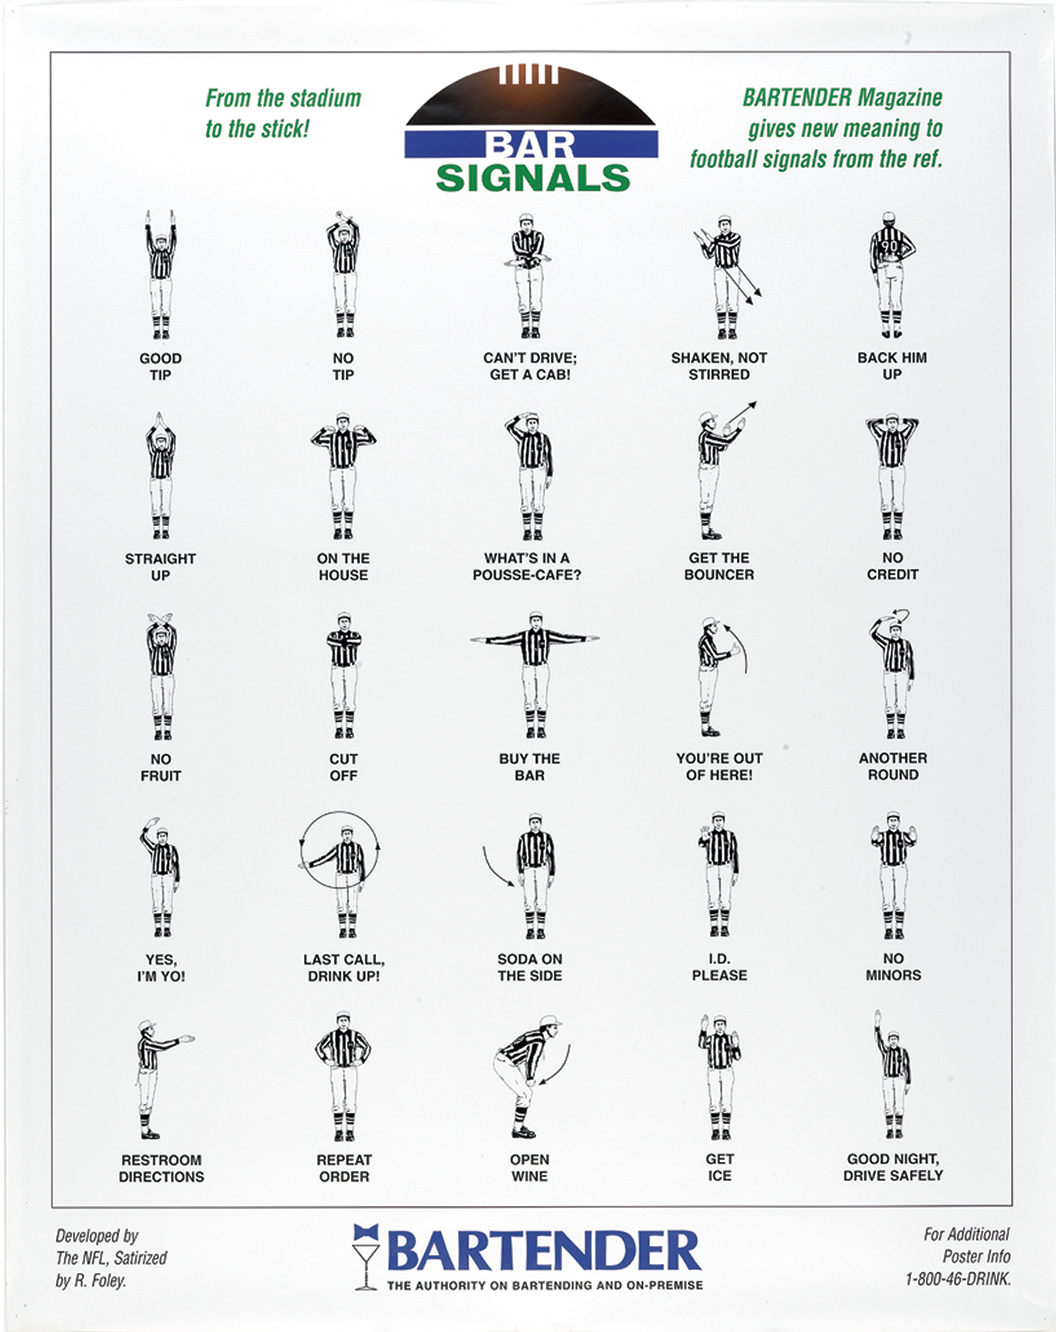 Check out our new Bar Signals Poster!